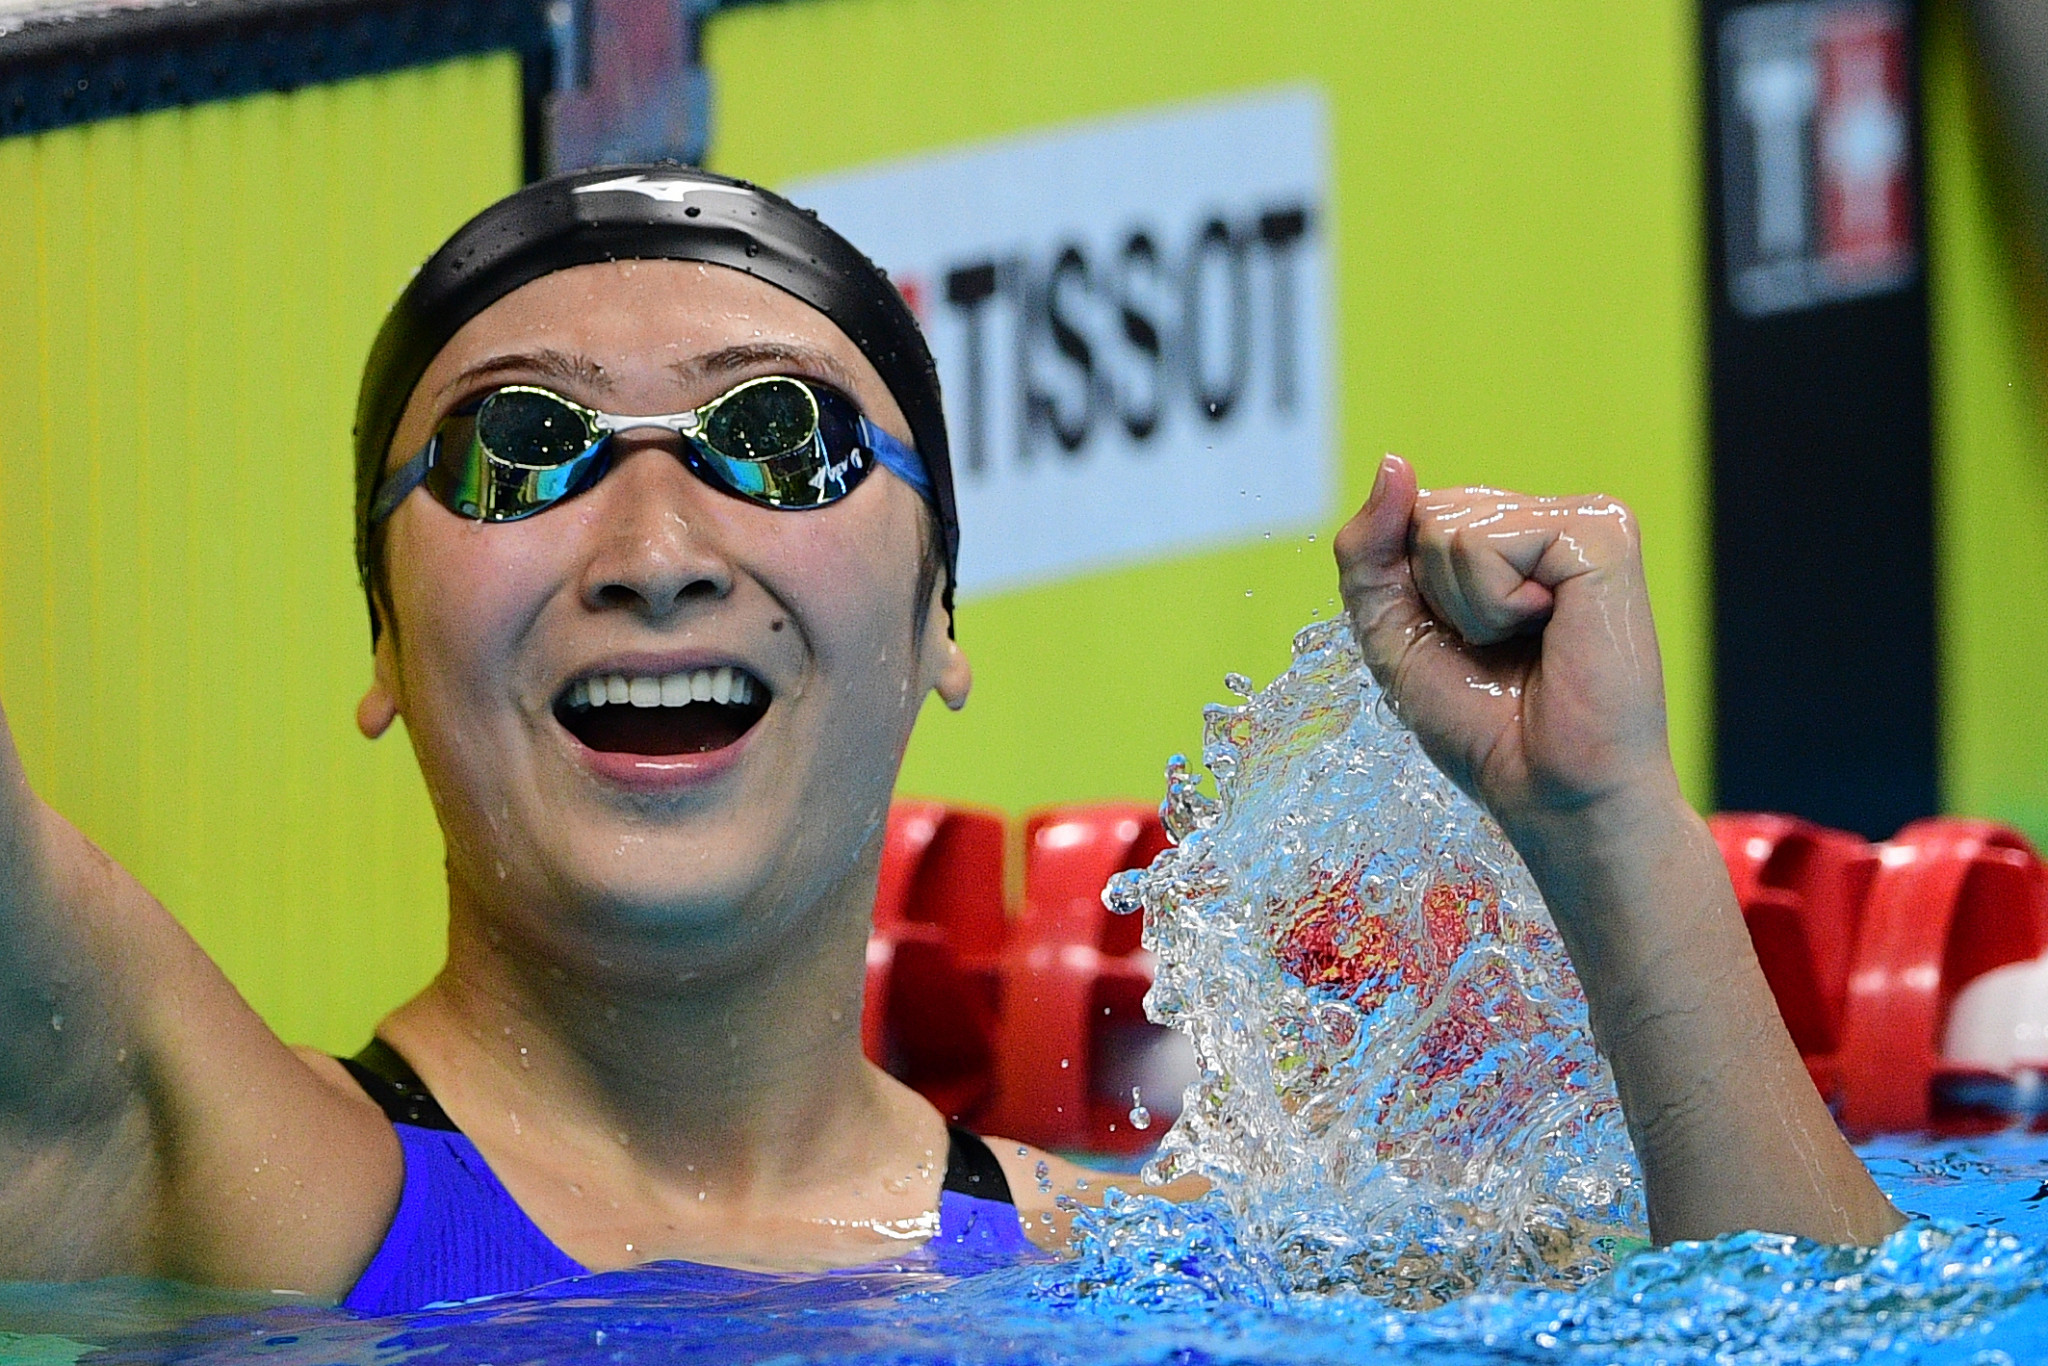 Japan's Rikako Ikee won two golds and set two Games records, at the GBK Aquatics Centre ©Getty Images